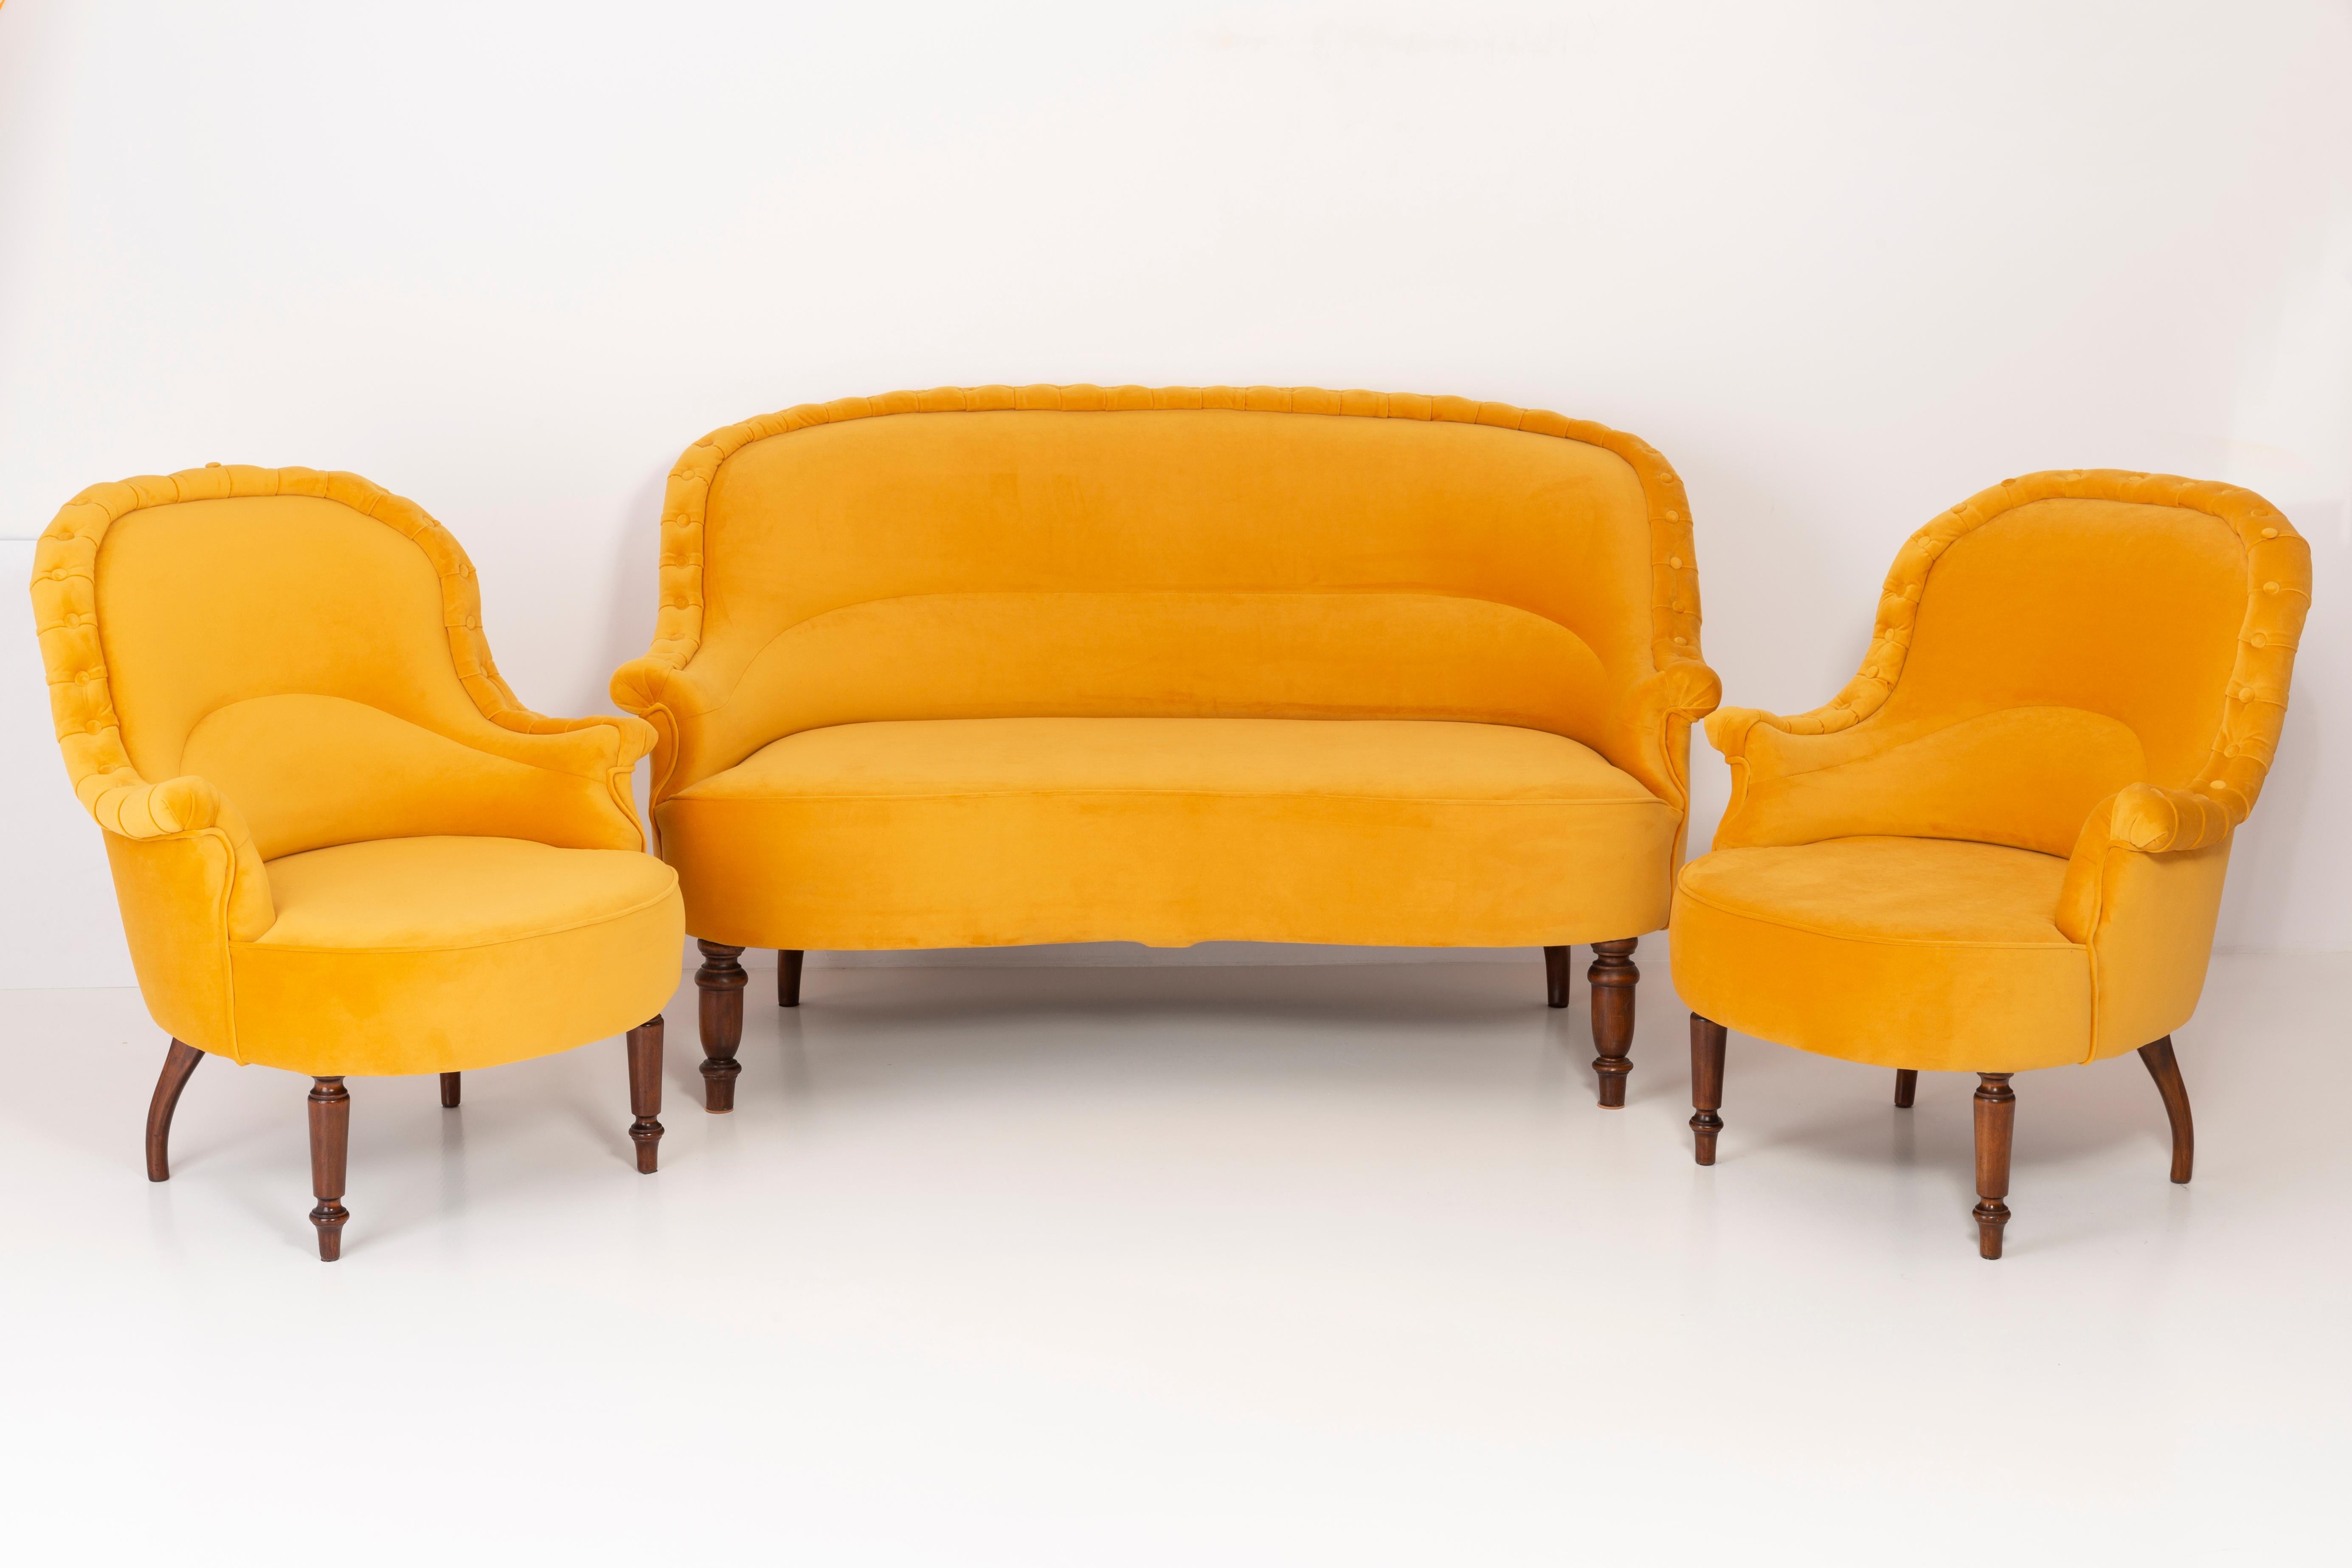 Sofa in Louis XVI Style Yellow Mustard, 1930s, Germany For Sale 6